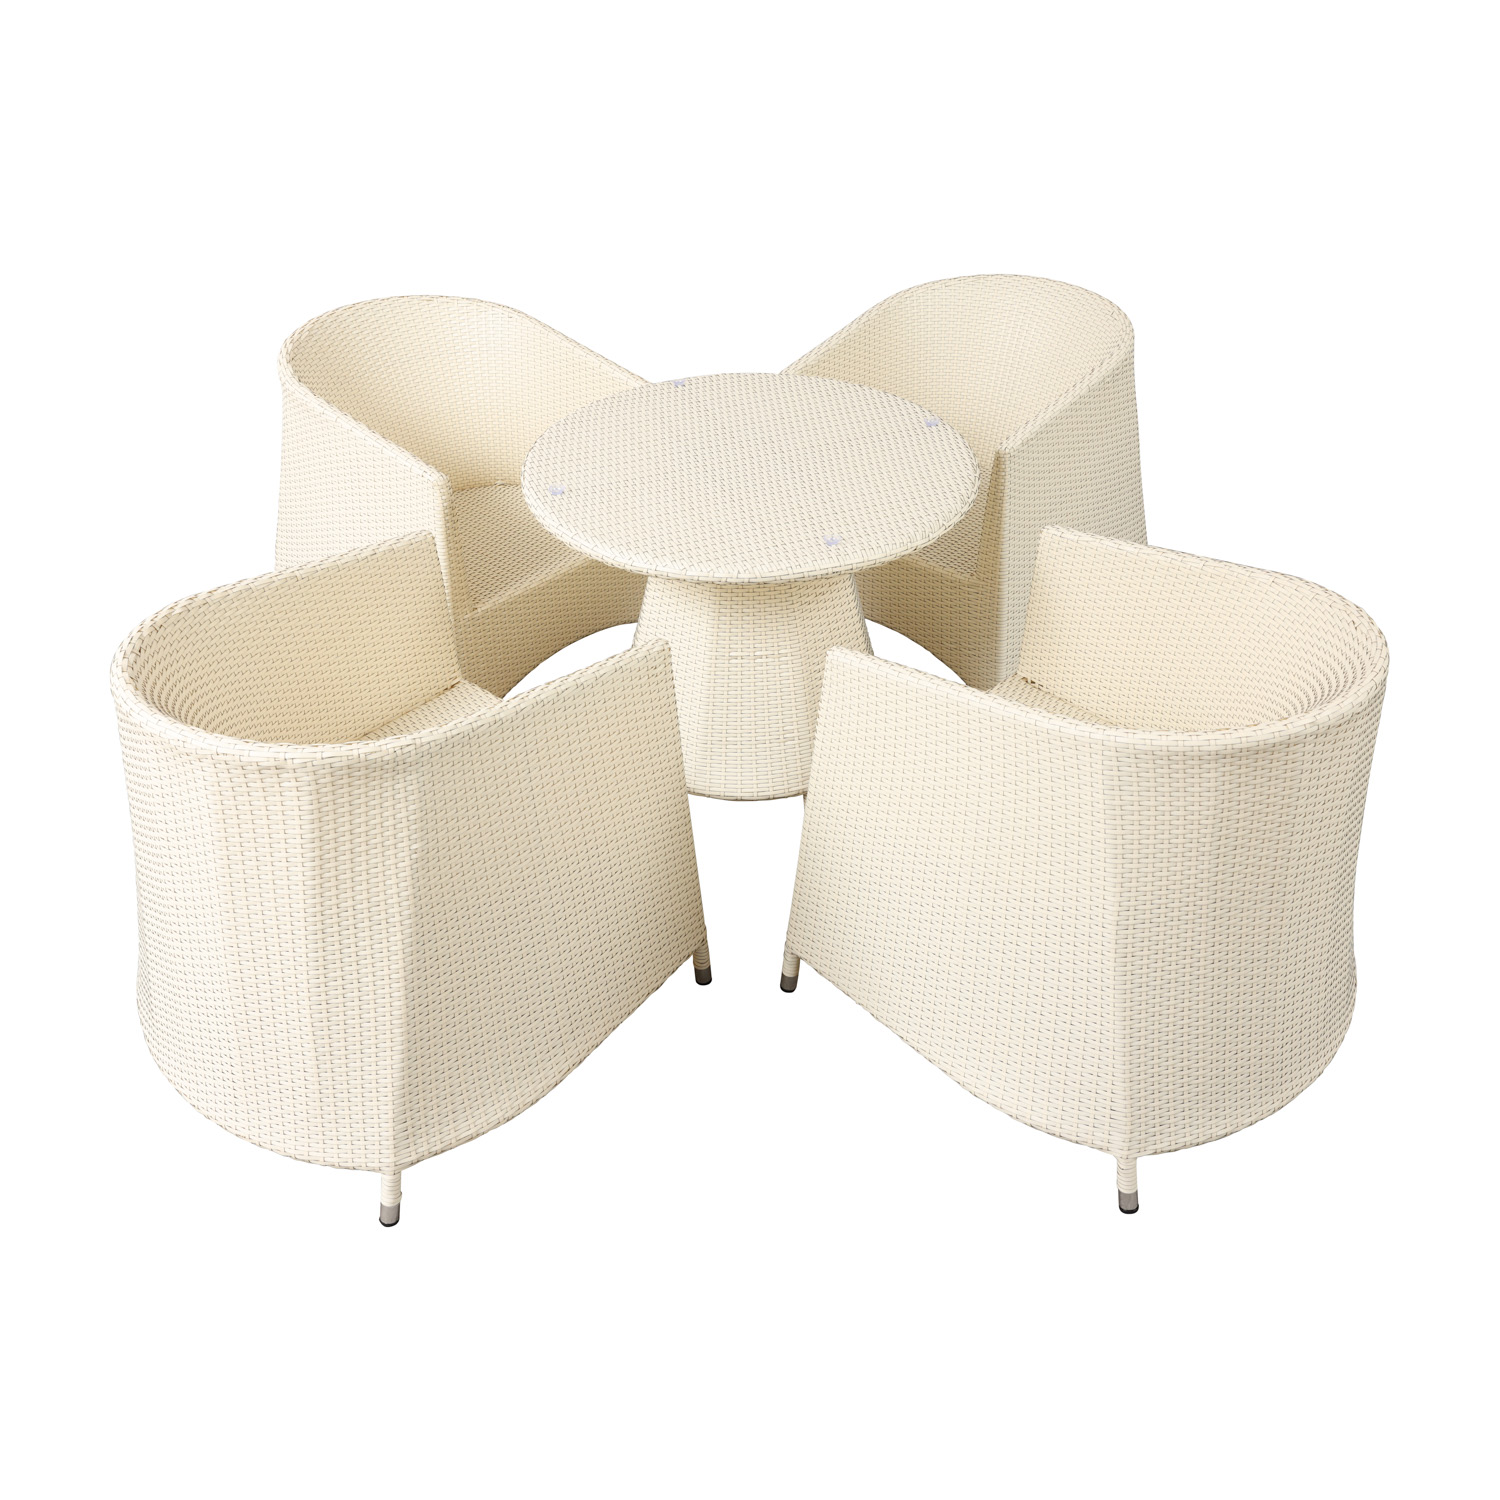 Classcial Rattan Weave Armchair Dining Table Chair Set | Shinlin Outdoor Dining Chairs CZ1003